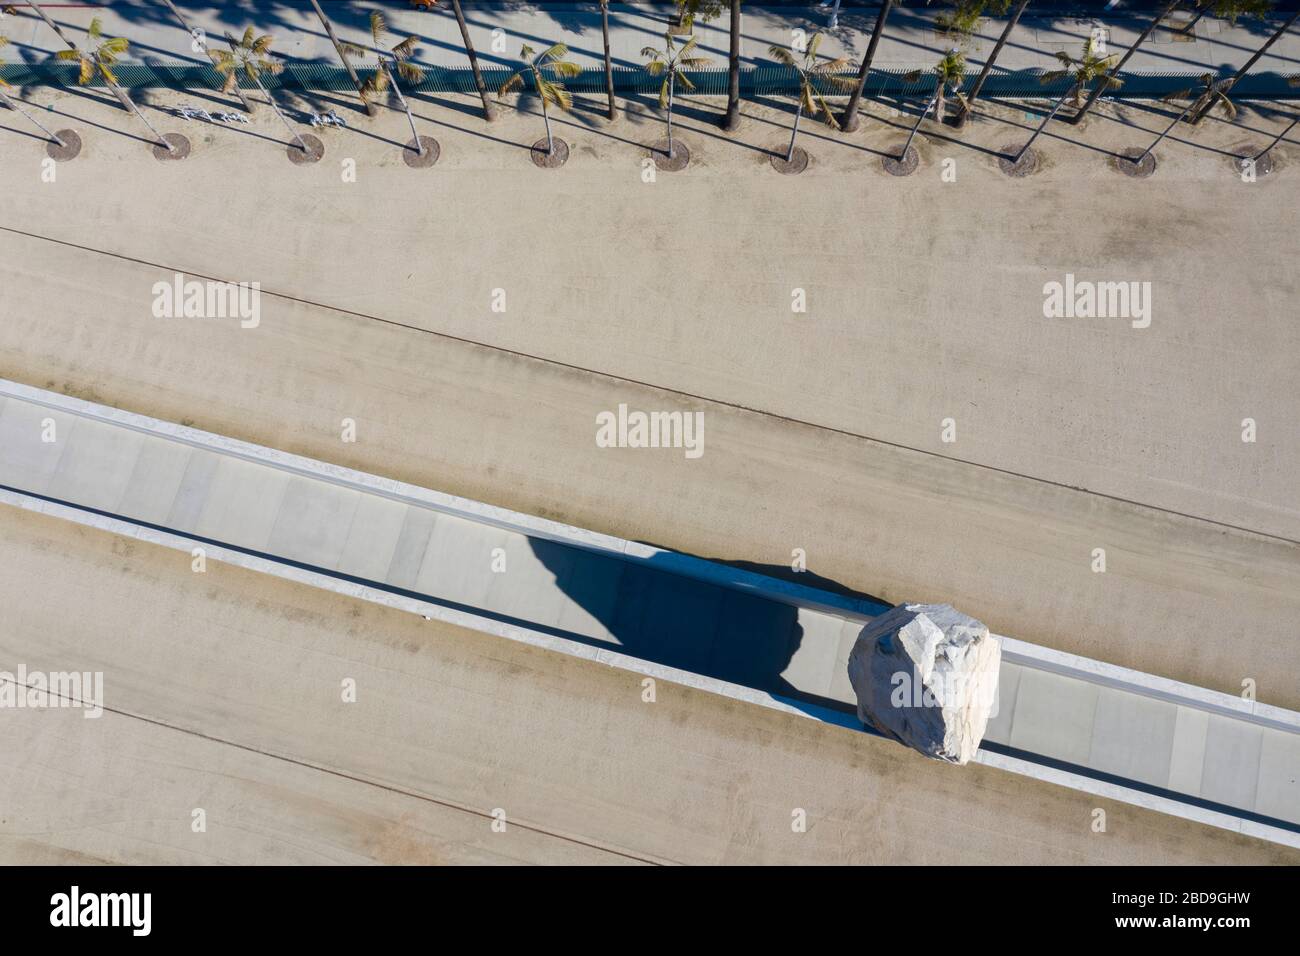 Aerial view of Levitated Mass by artist Michael Heizer at LACMA museum, Los Angeles Stock Photo